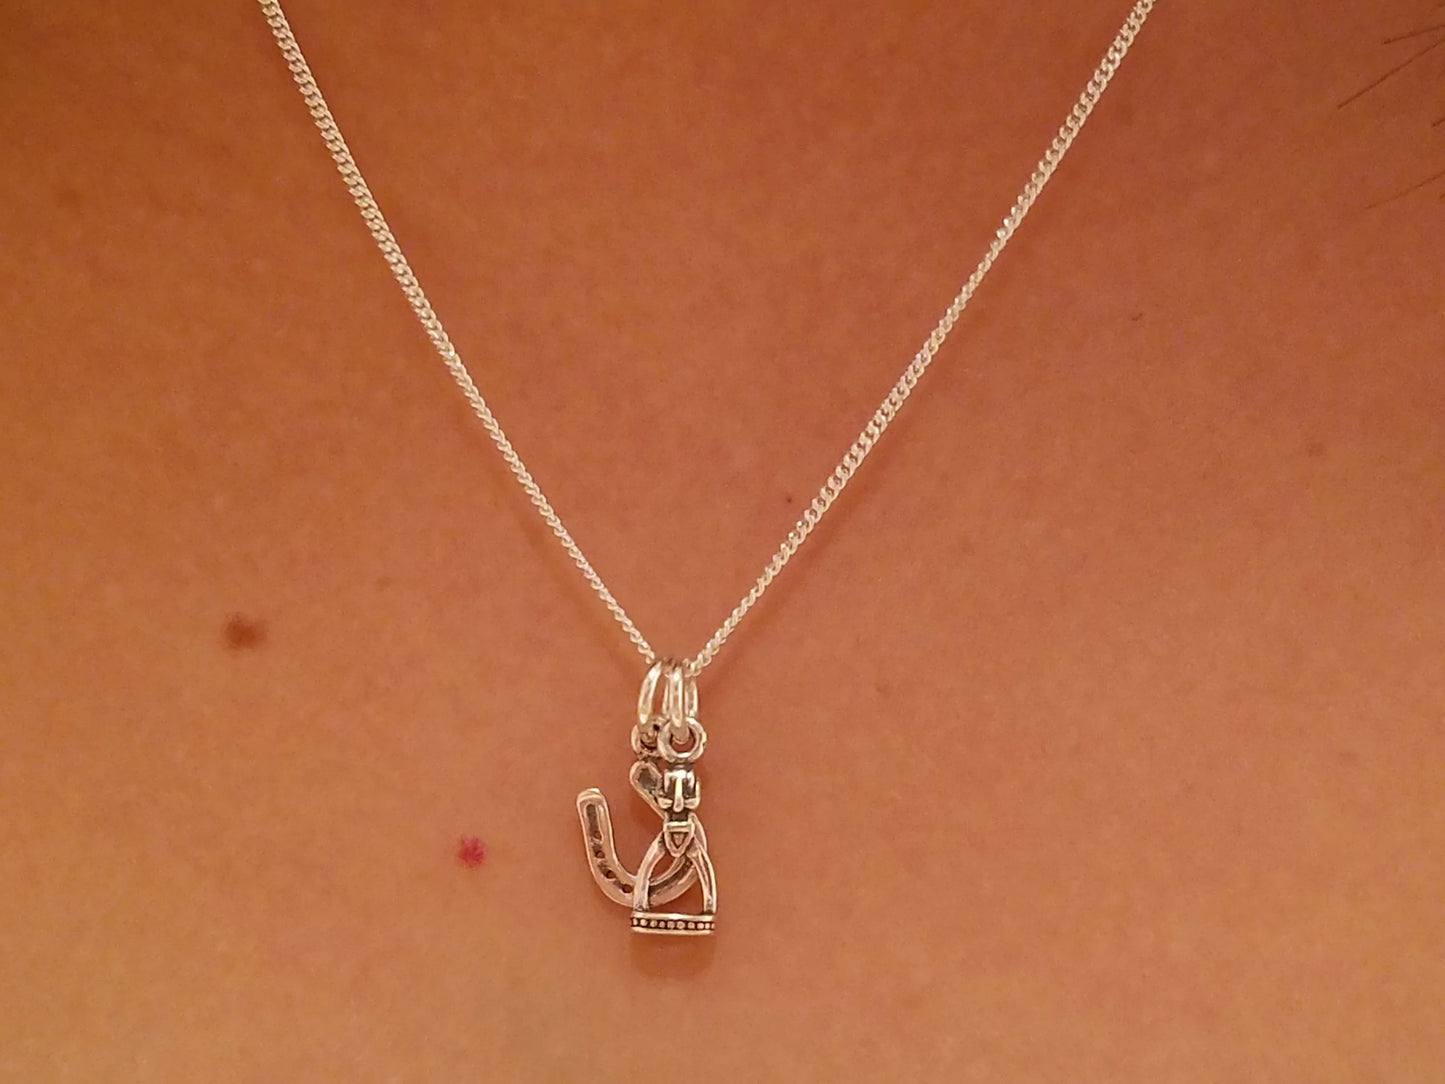 Sterling Silver Horseshoe and Stirrup Charm Necklace